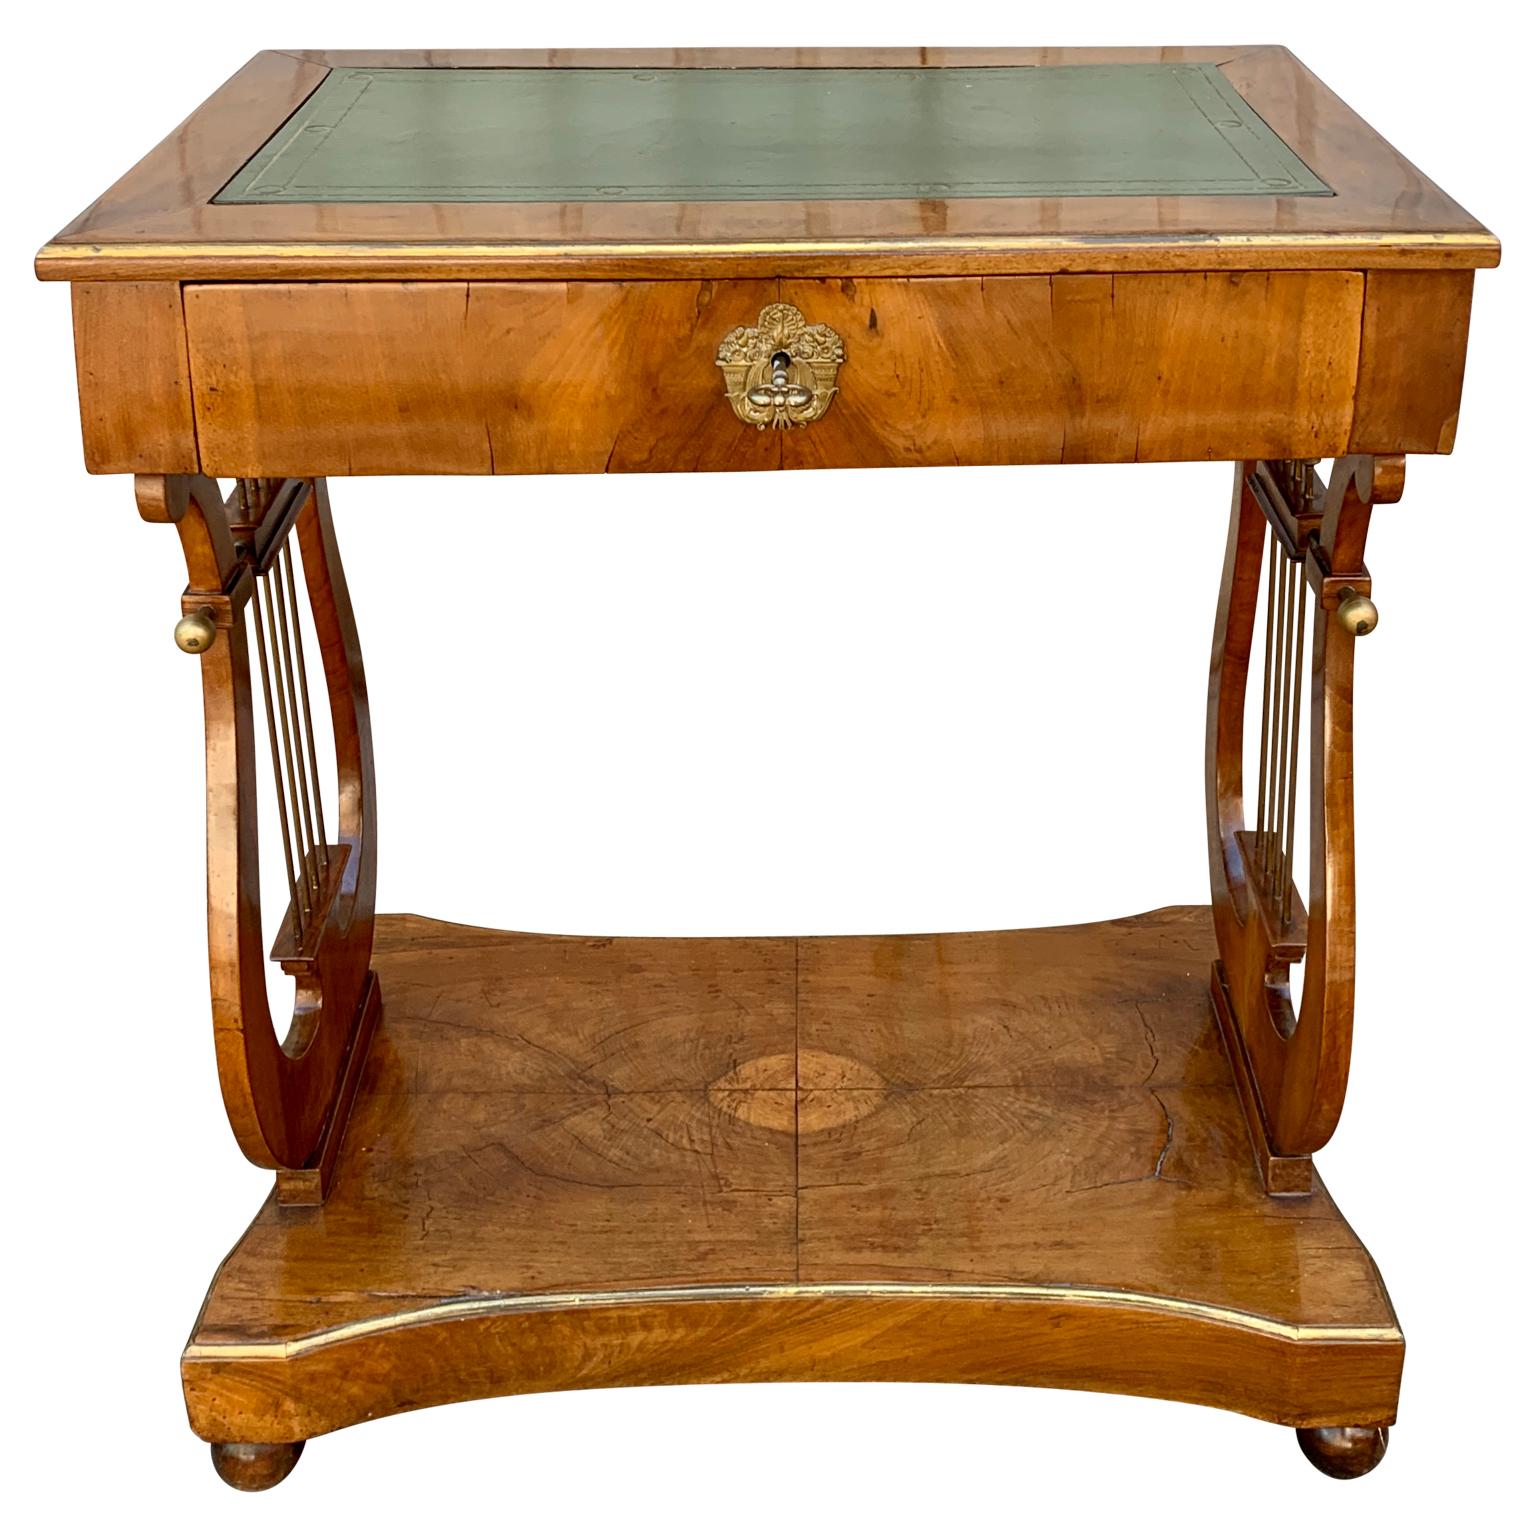 A small mahogany and walnut veneered table or writing desk with brass holders in the lyres formed sides. The top is provided with inlaid green leather; the drawers have divided small compartments. The small table has brass lists decorating all